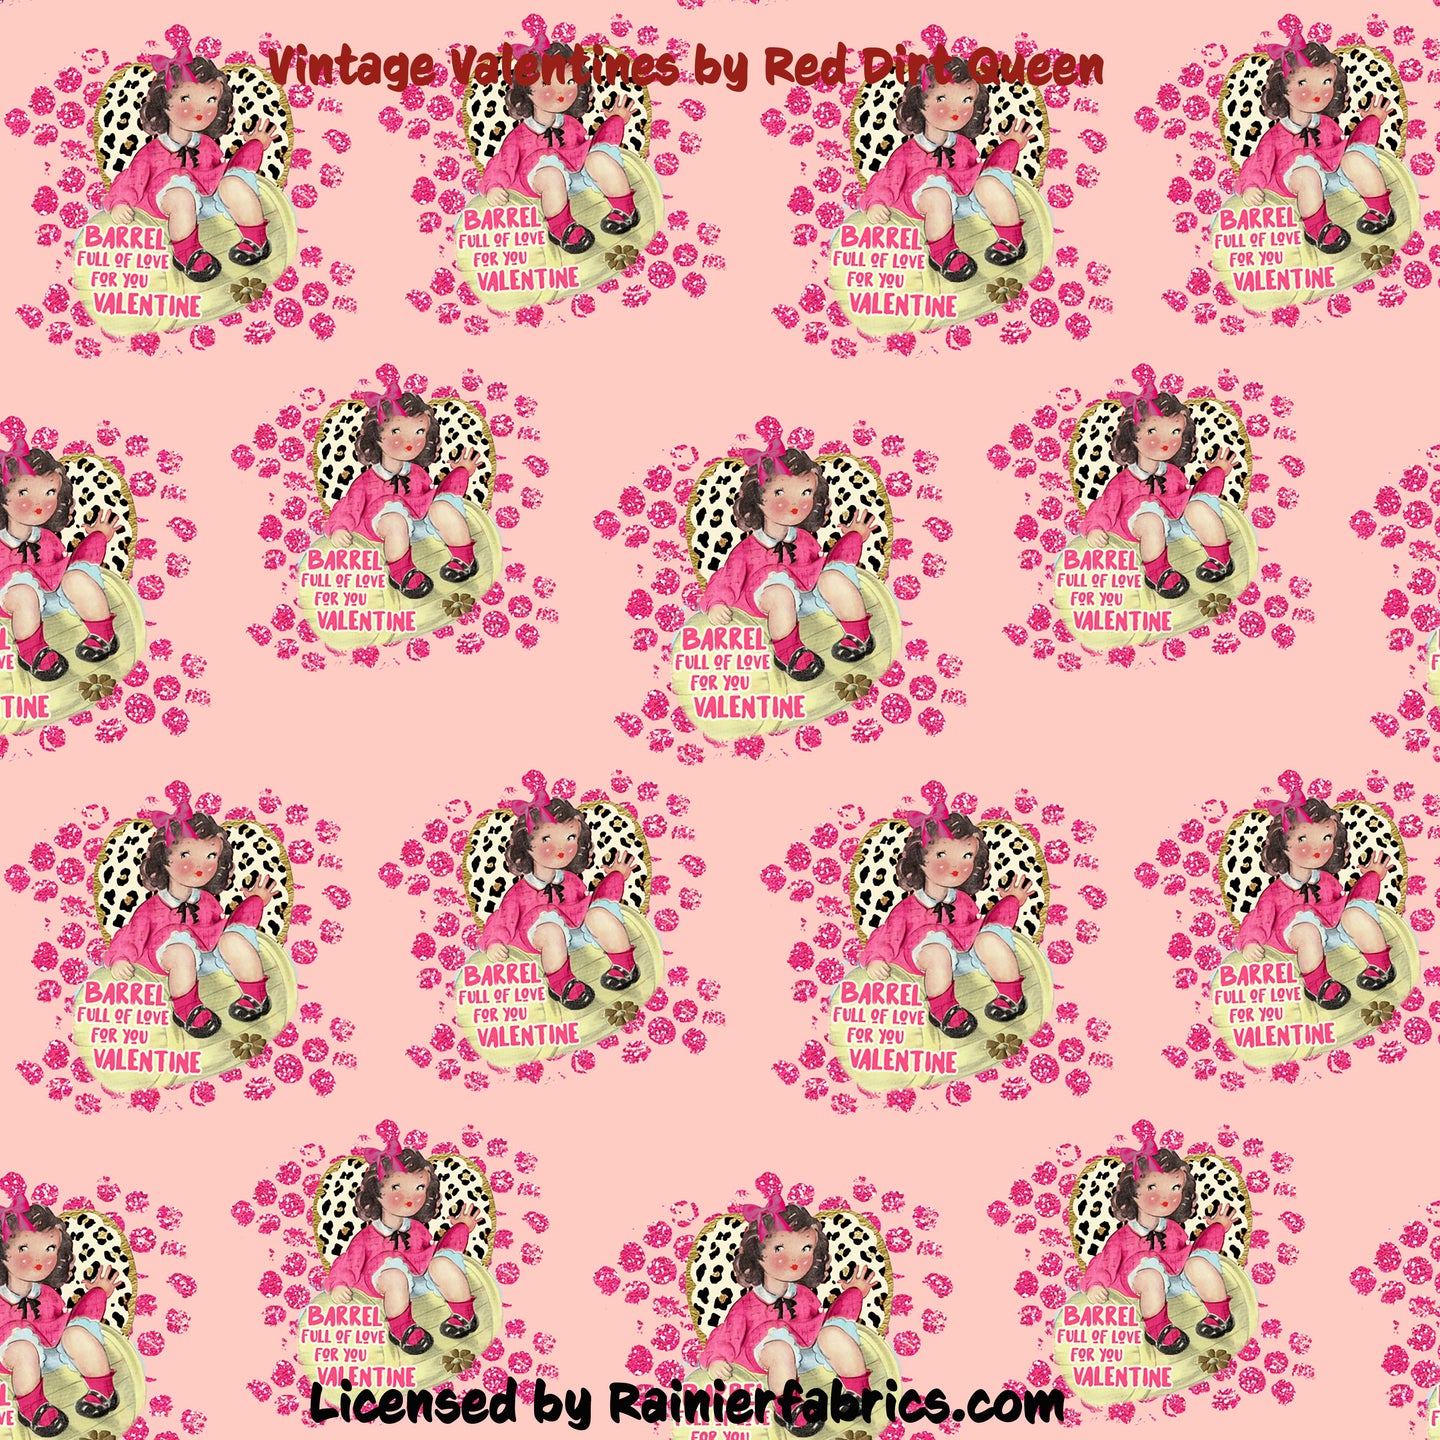 Vintage Valentines by Red Dirt Queen - 2-5 day turnaround - Order by 1/2 yard; Description of bases below